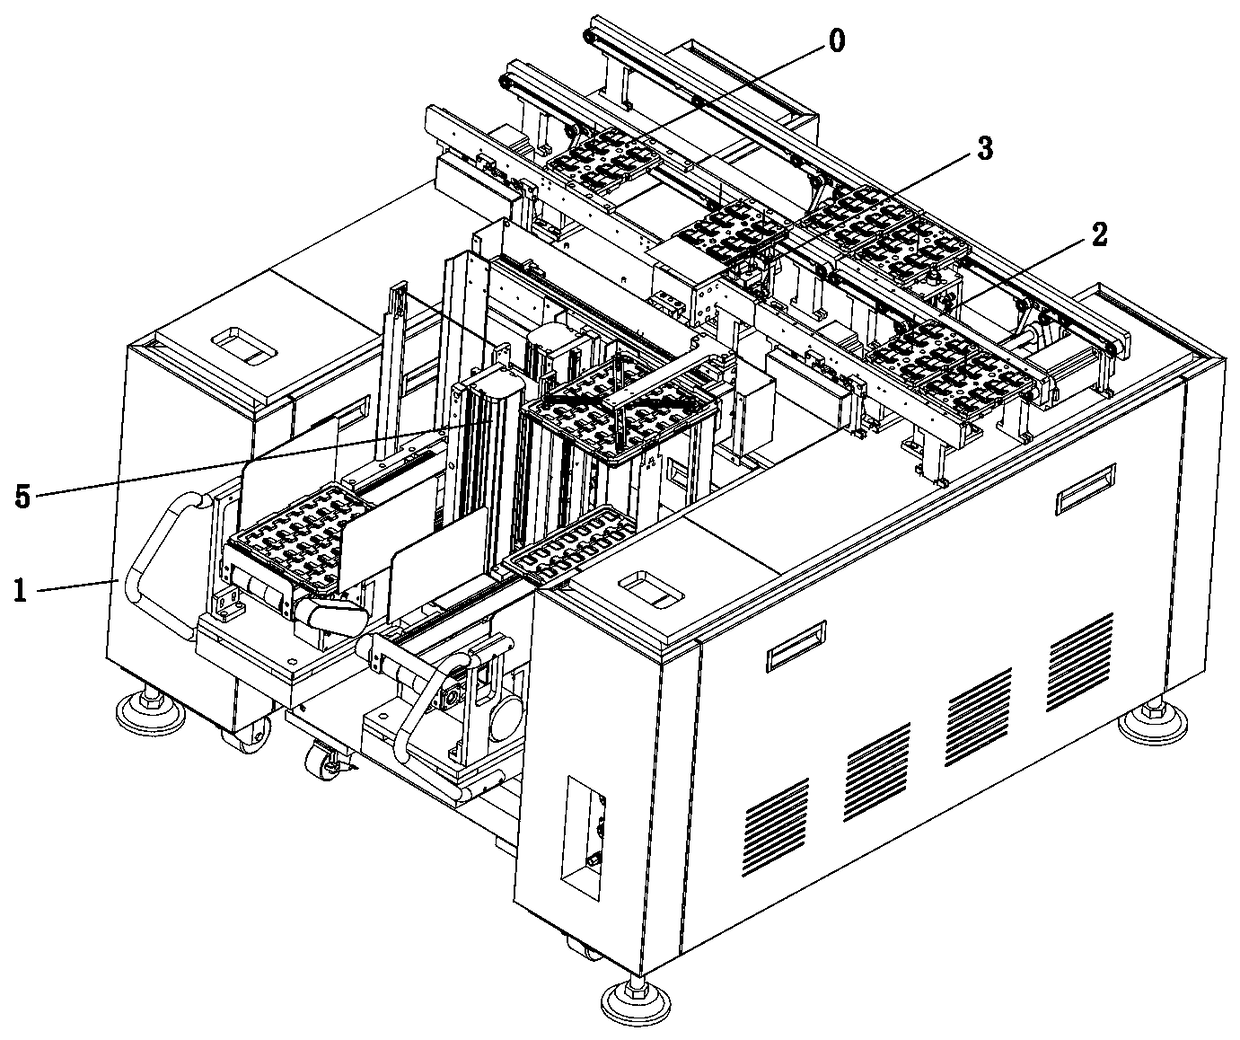 Automatic precise assembly machine